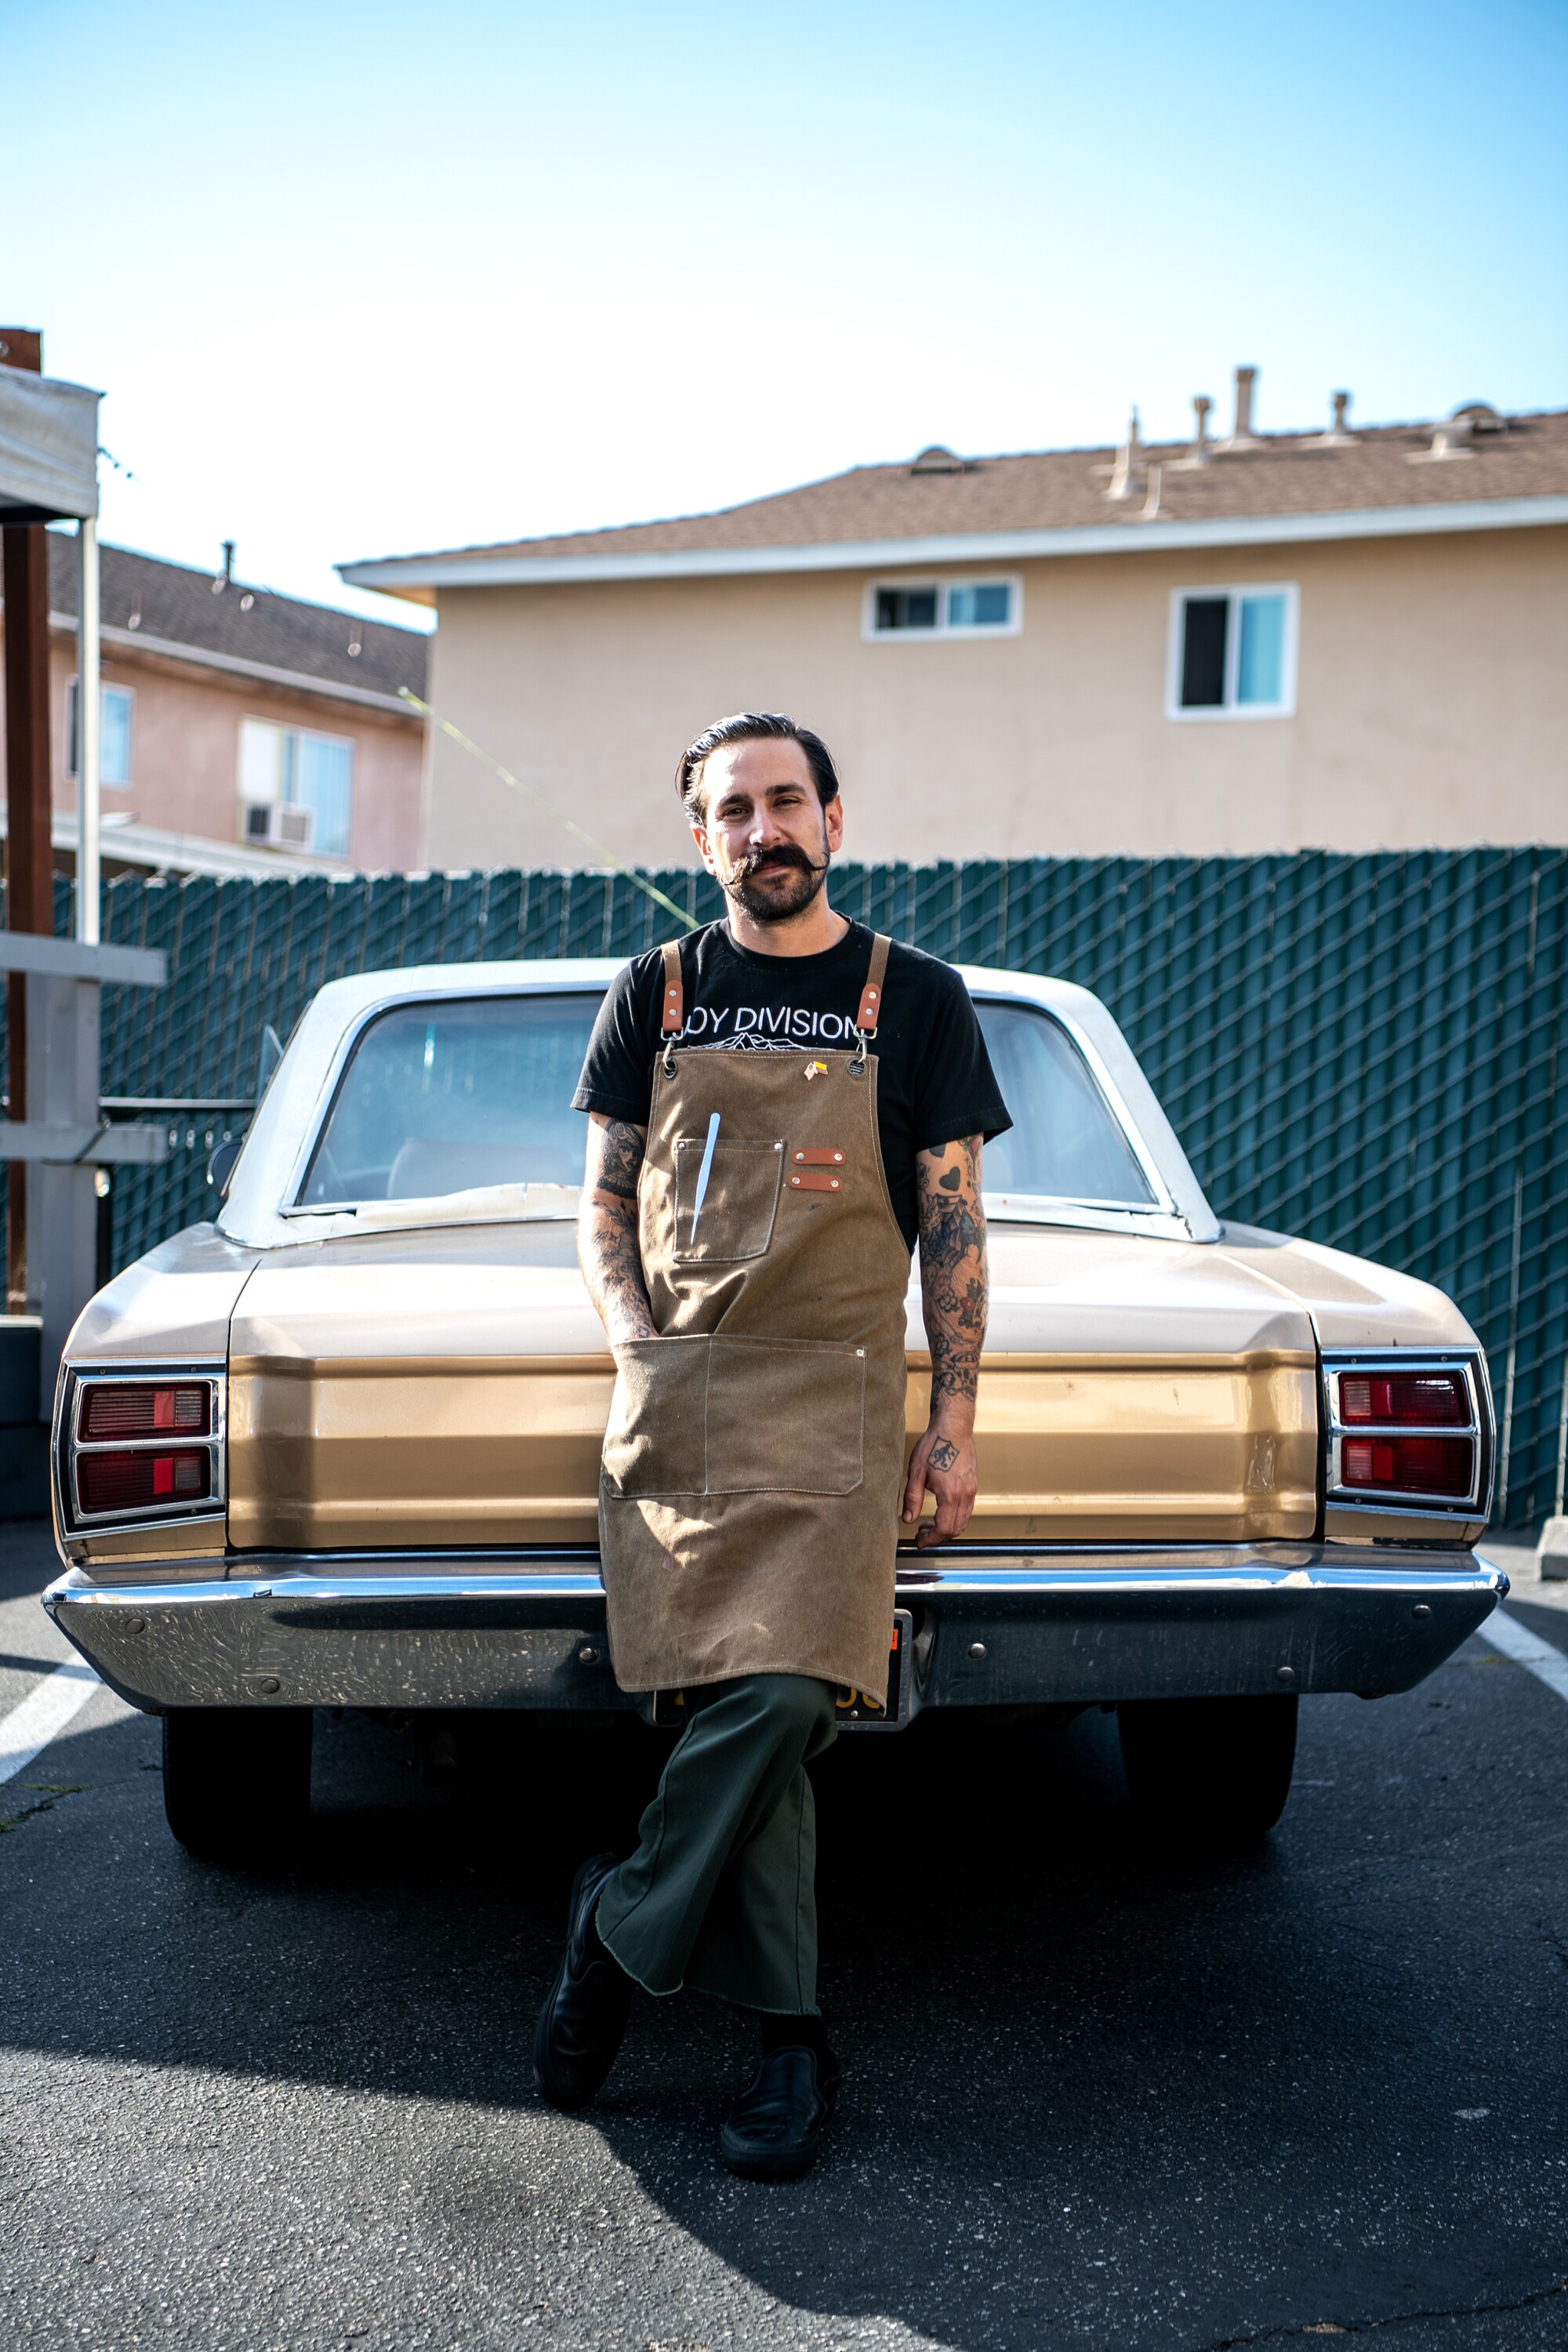 A man in an apron stands in front of a car.